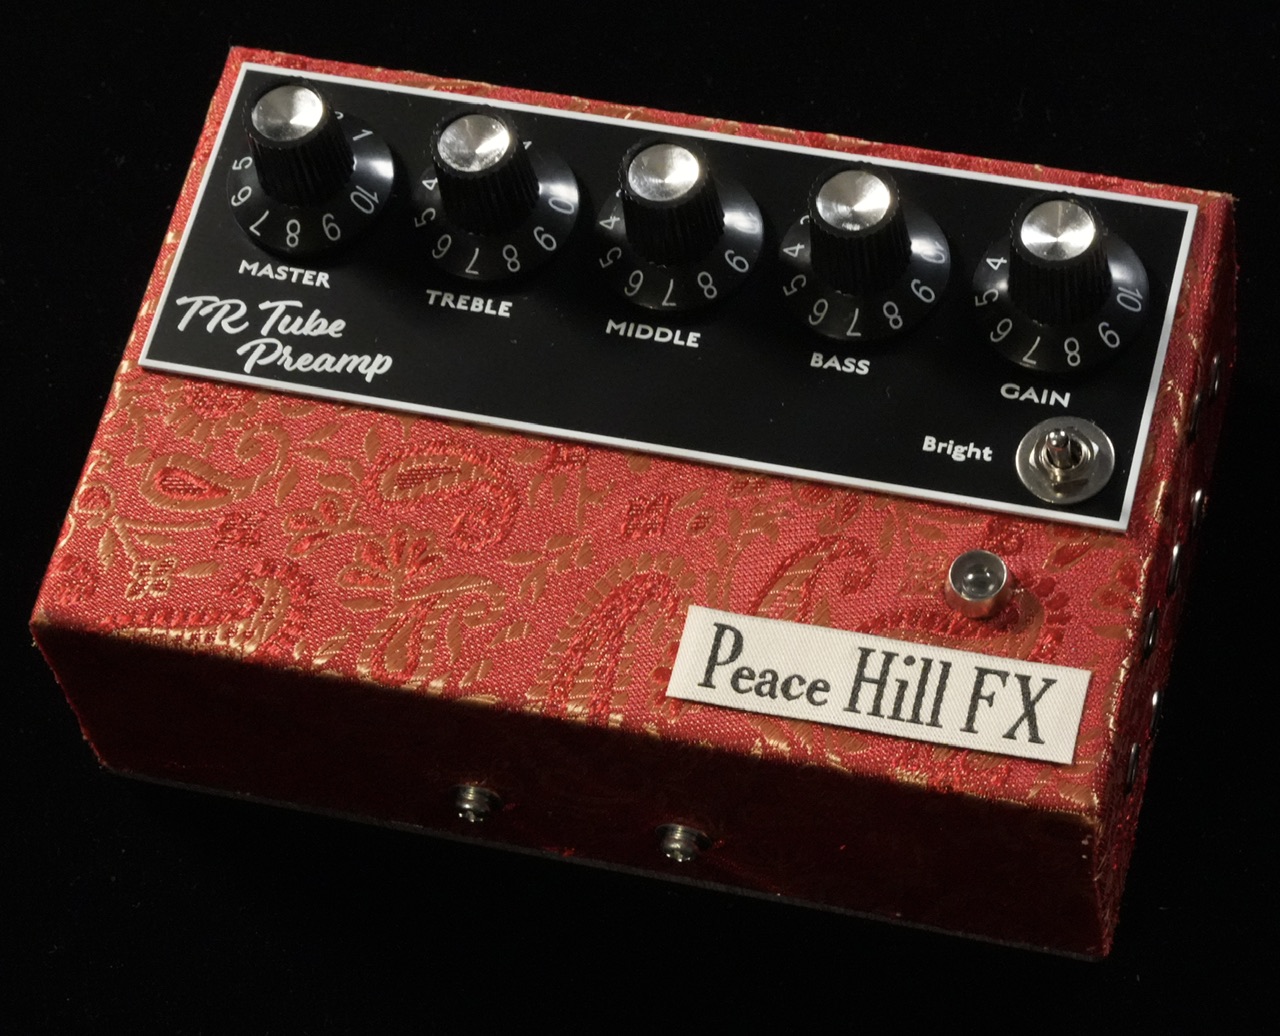 peace hill fx tr tube preamp エフェクター保証書も付属いたします